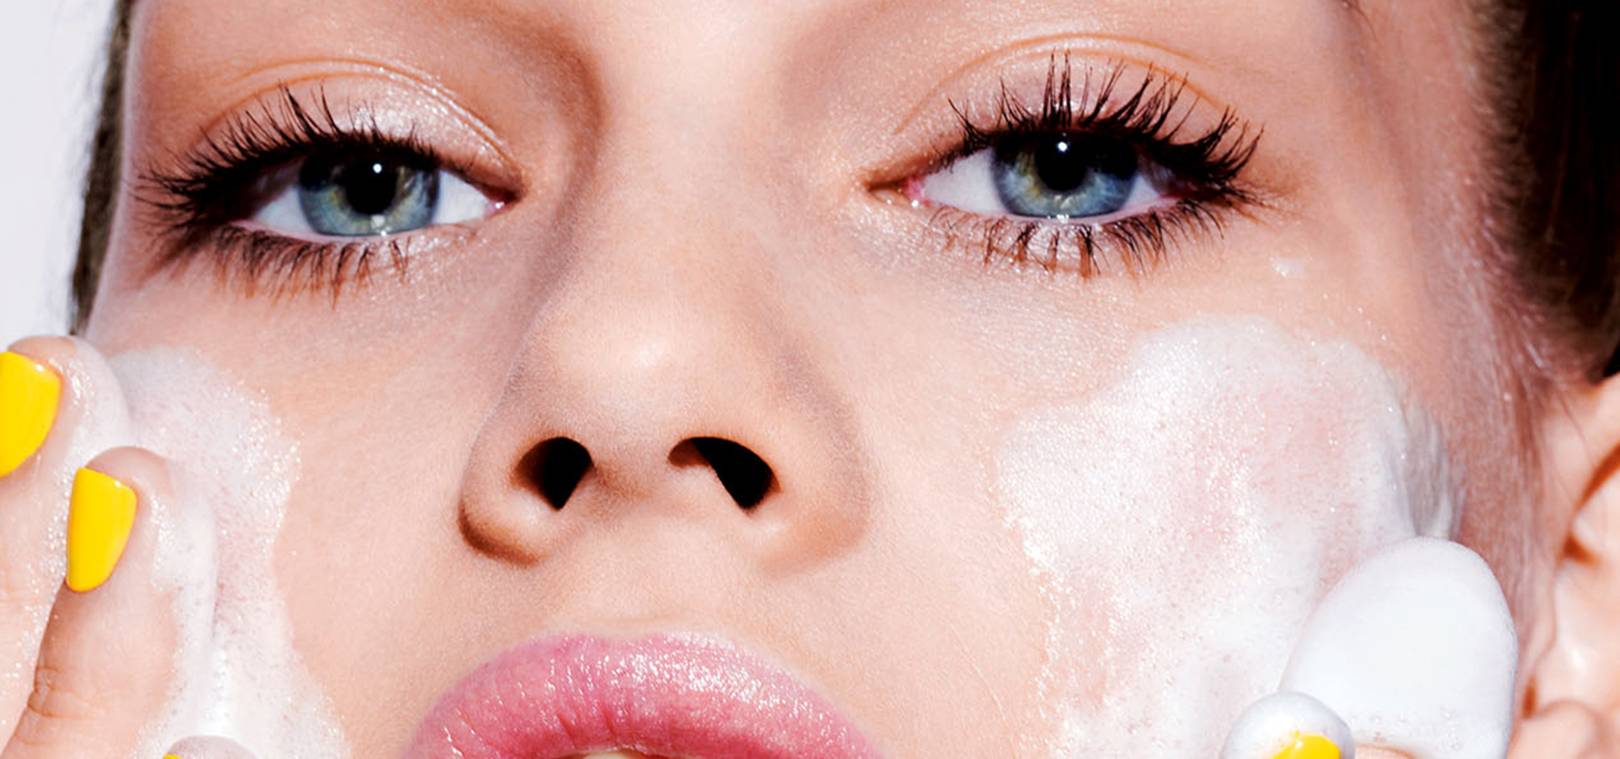 It Turns Out Weve All Been Washing Our Faces Wrong Heres How To Do